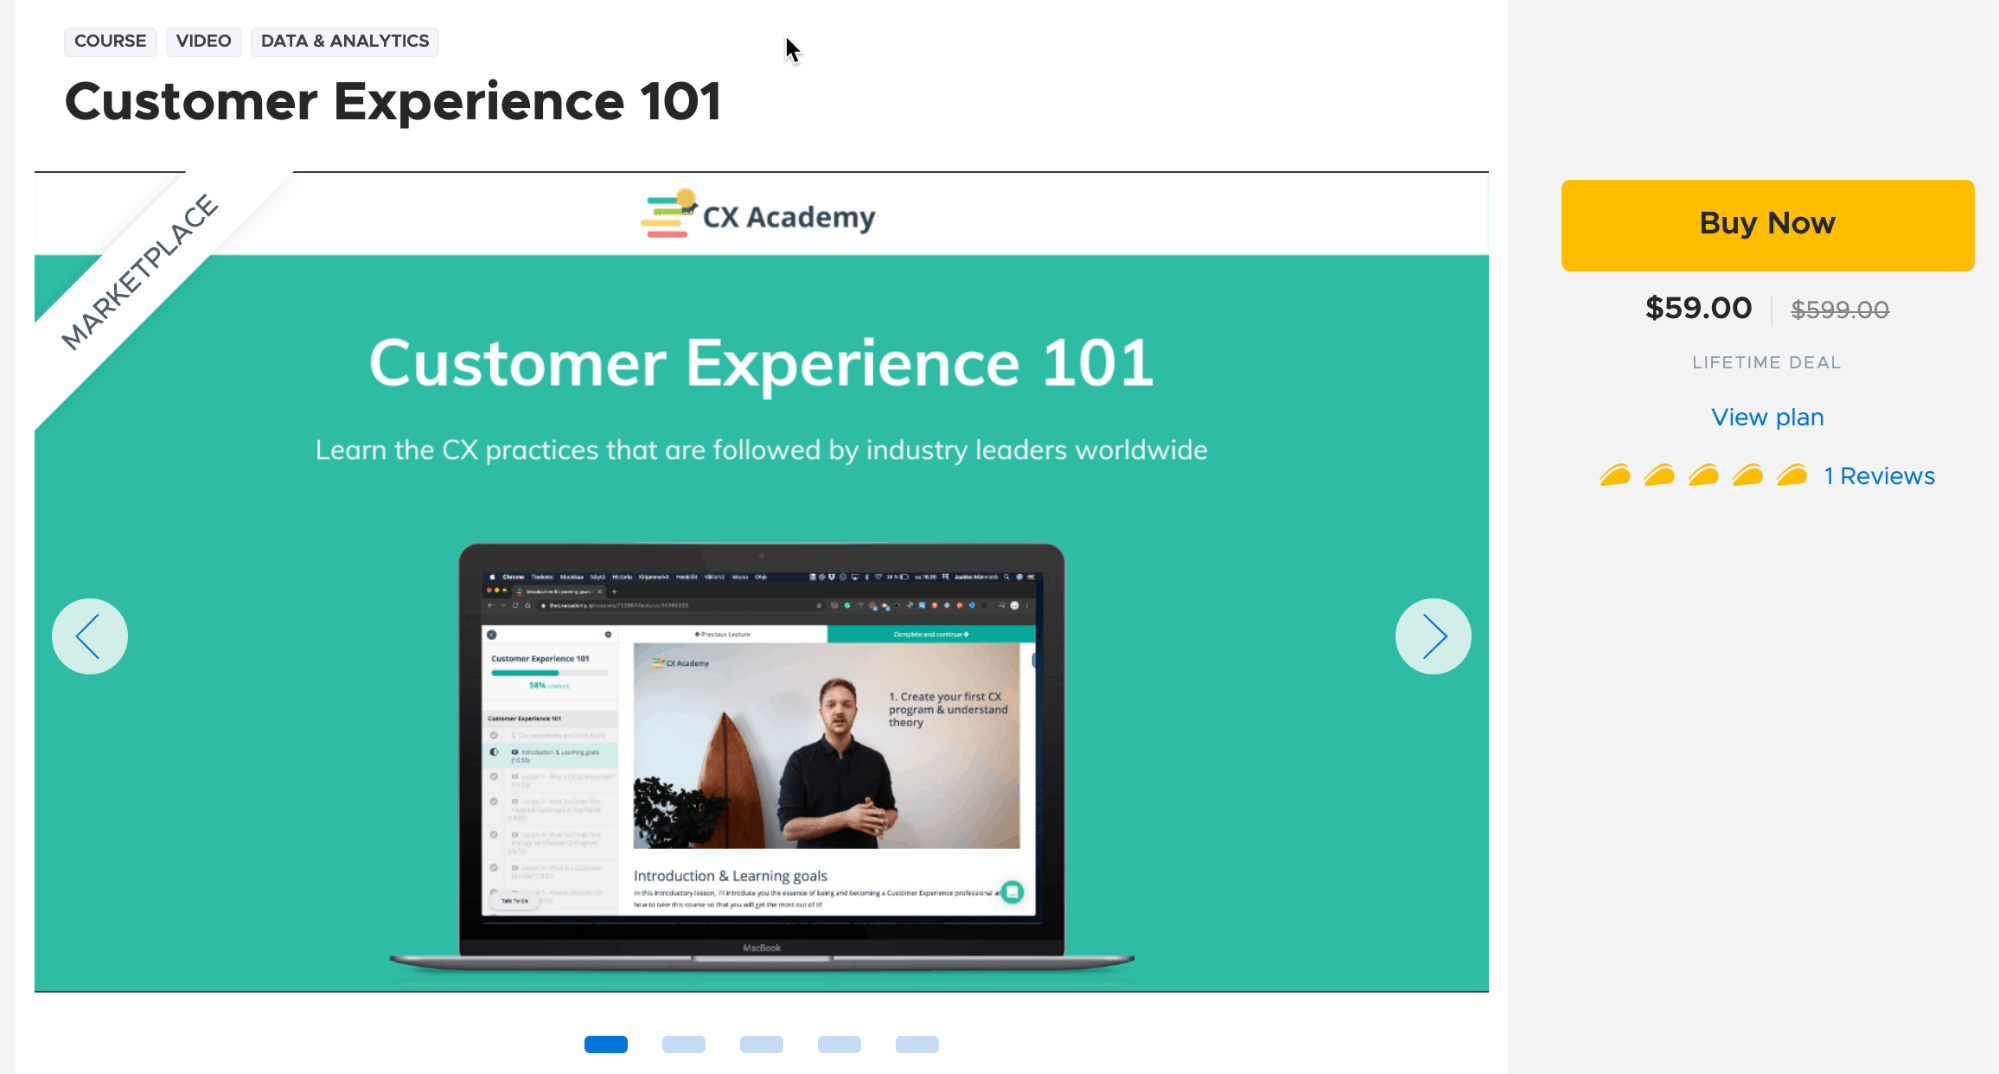 Customer Experience 101 course from CX Academy